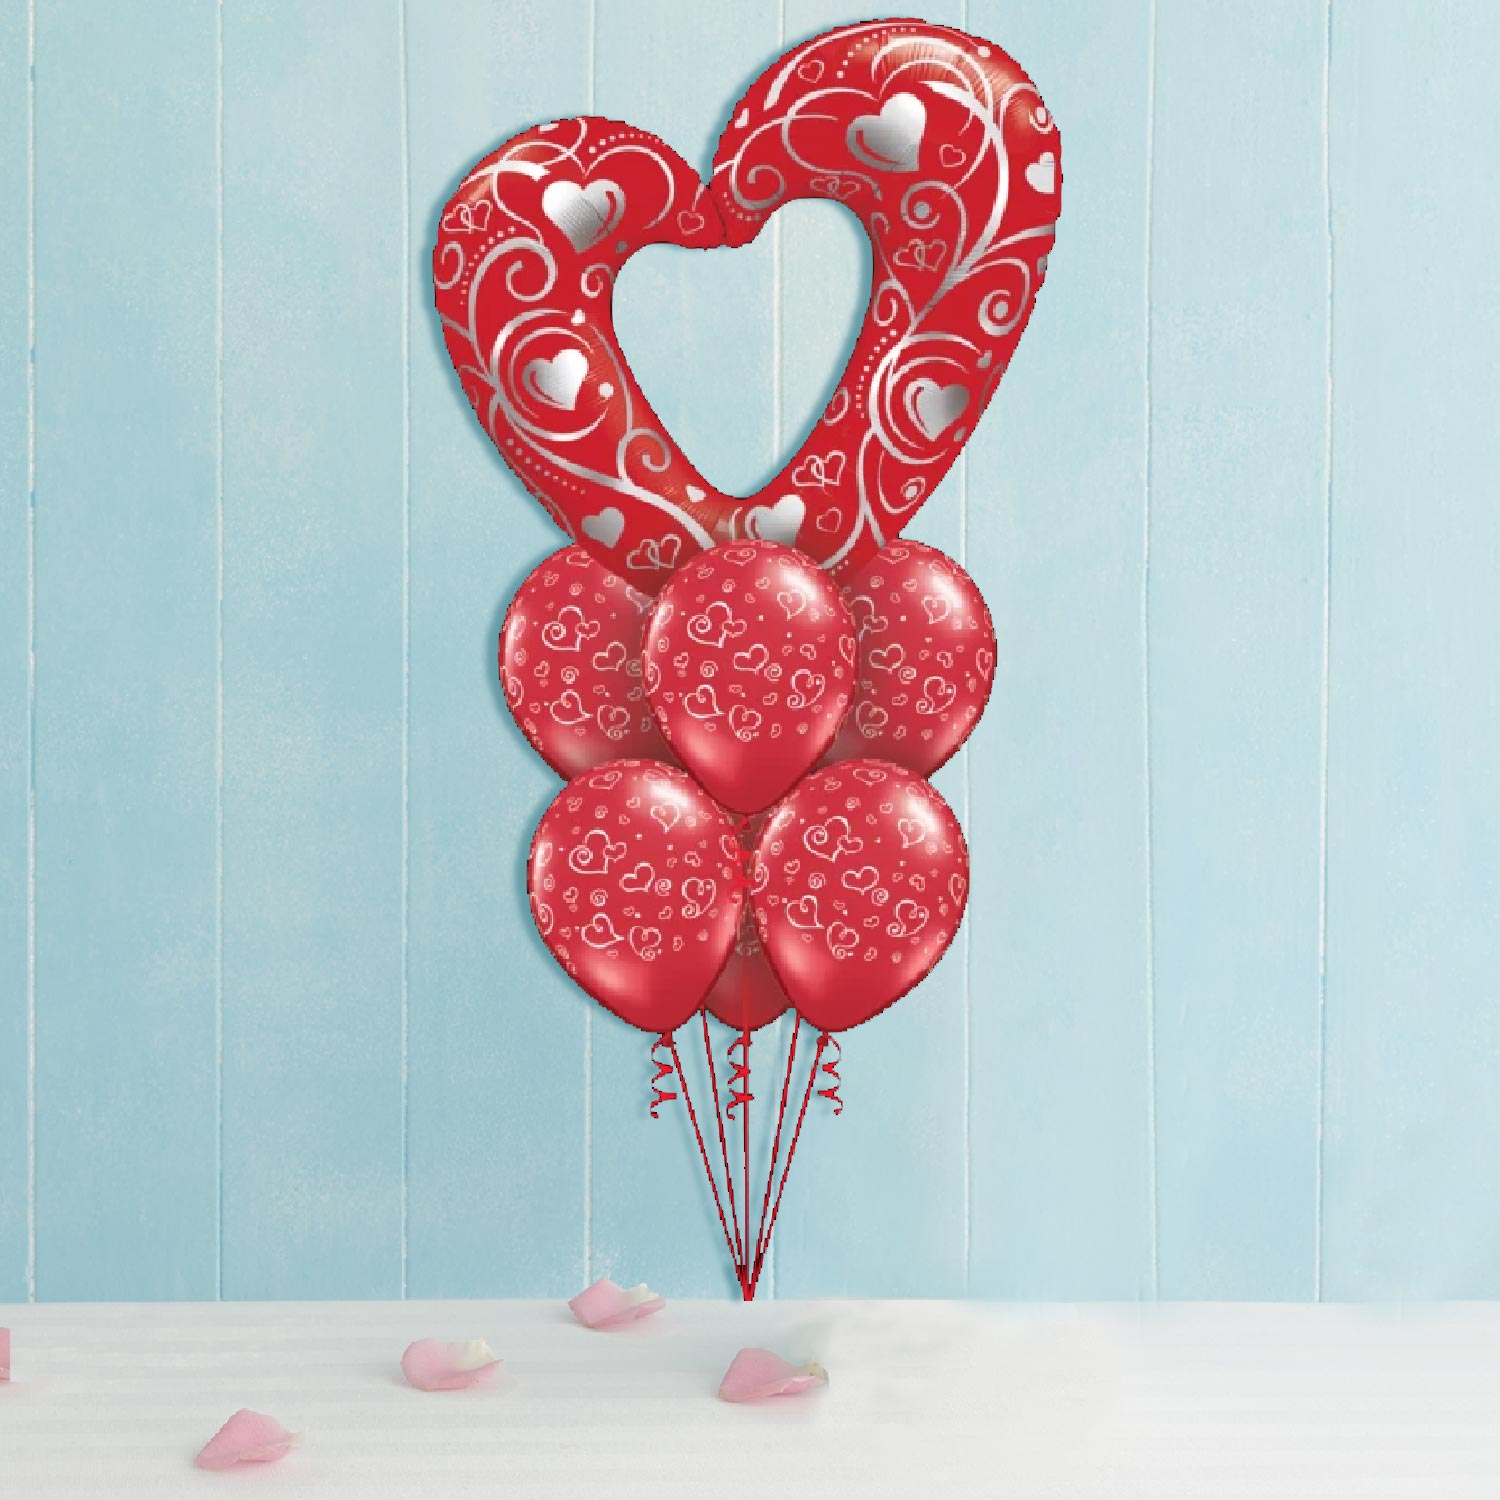 Hot Love Red Balloons (6831277310116)